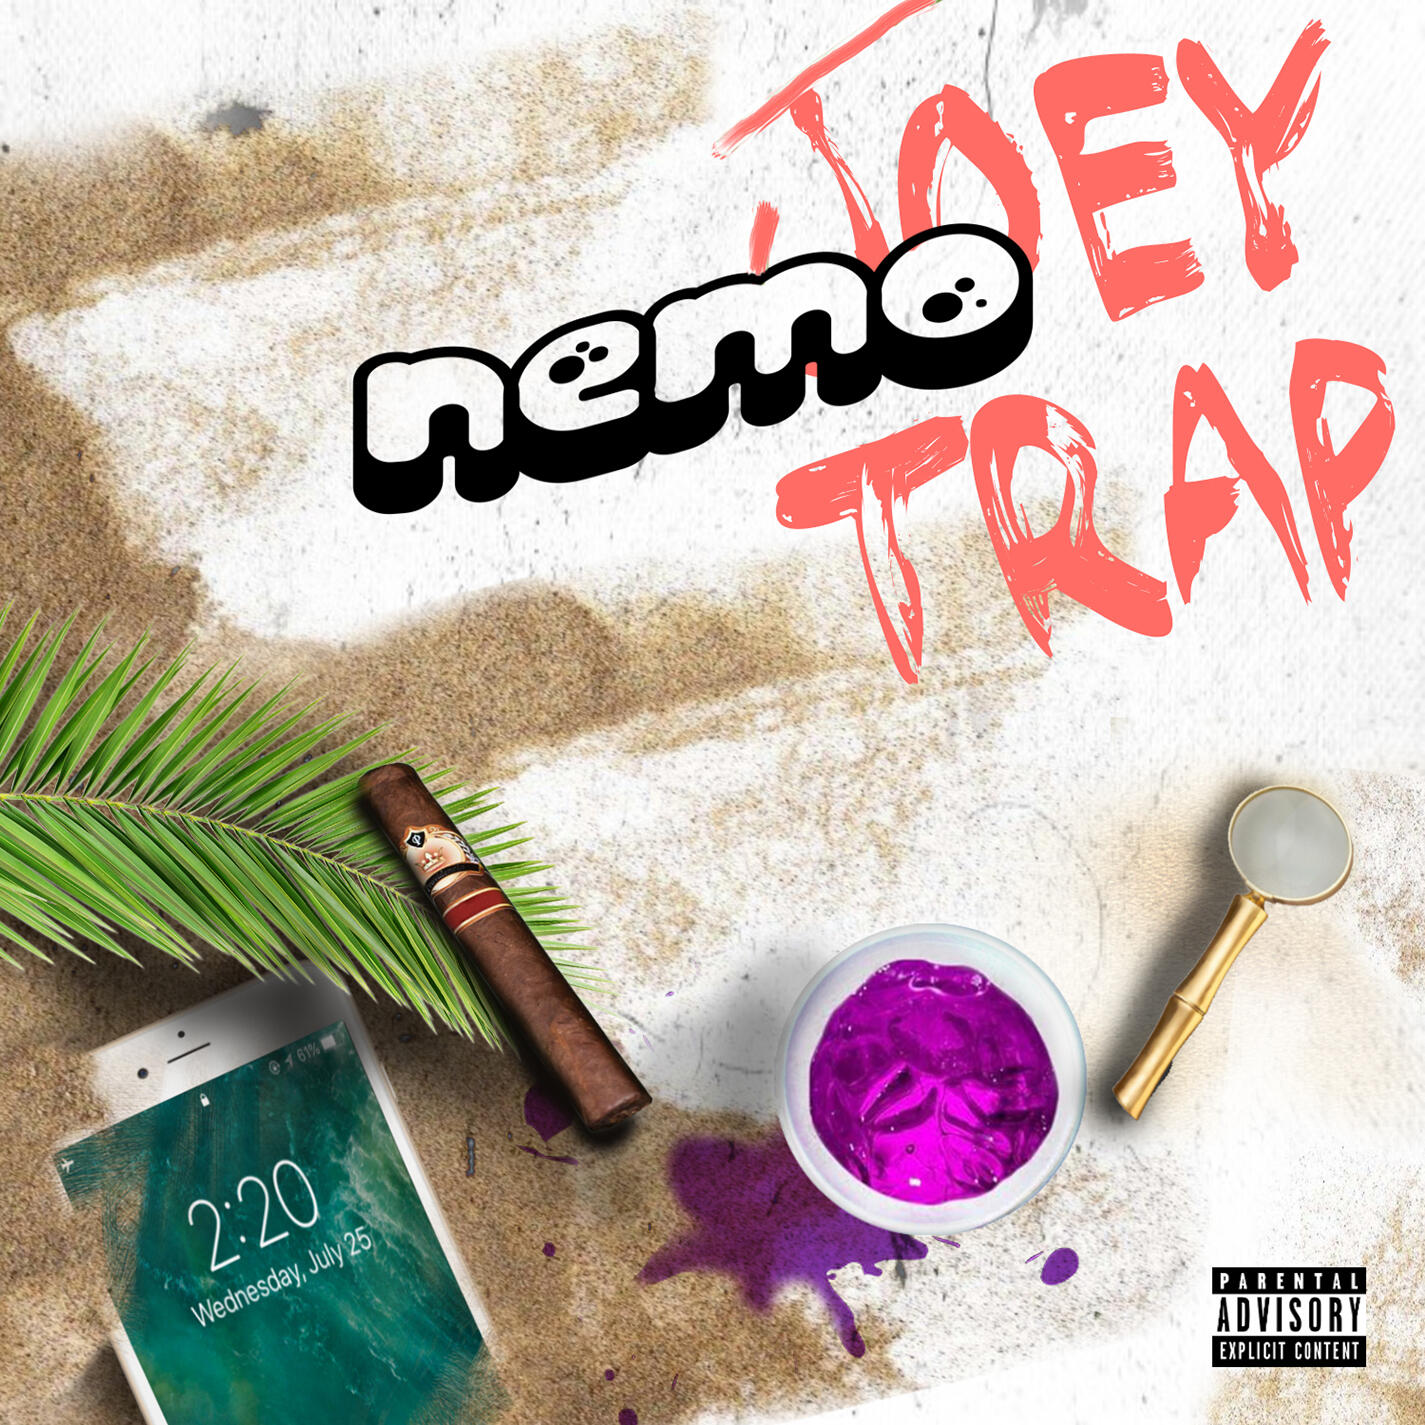 Stream Free Songs By Joey Trap Similar Artists Iheartradio